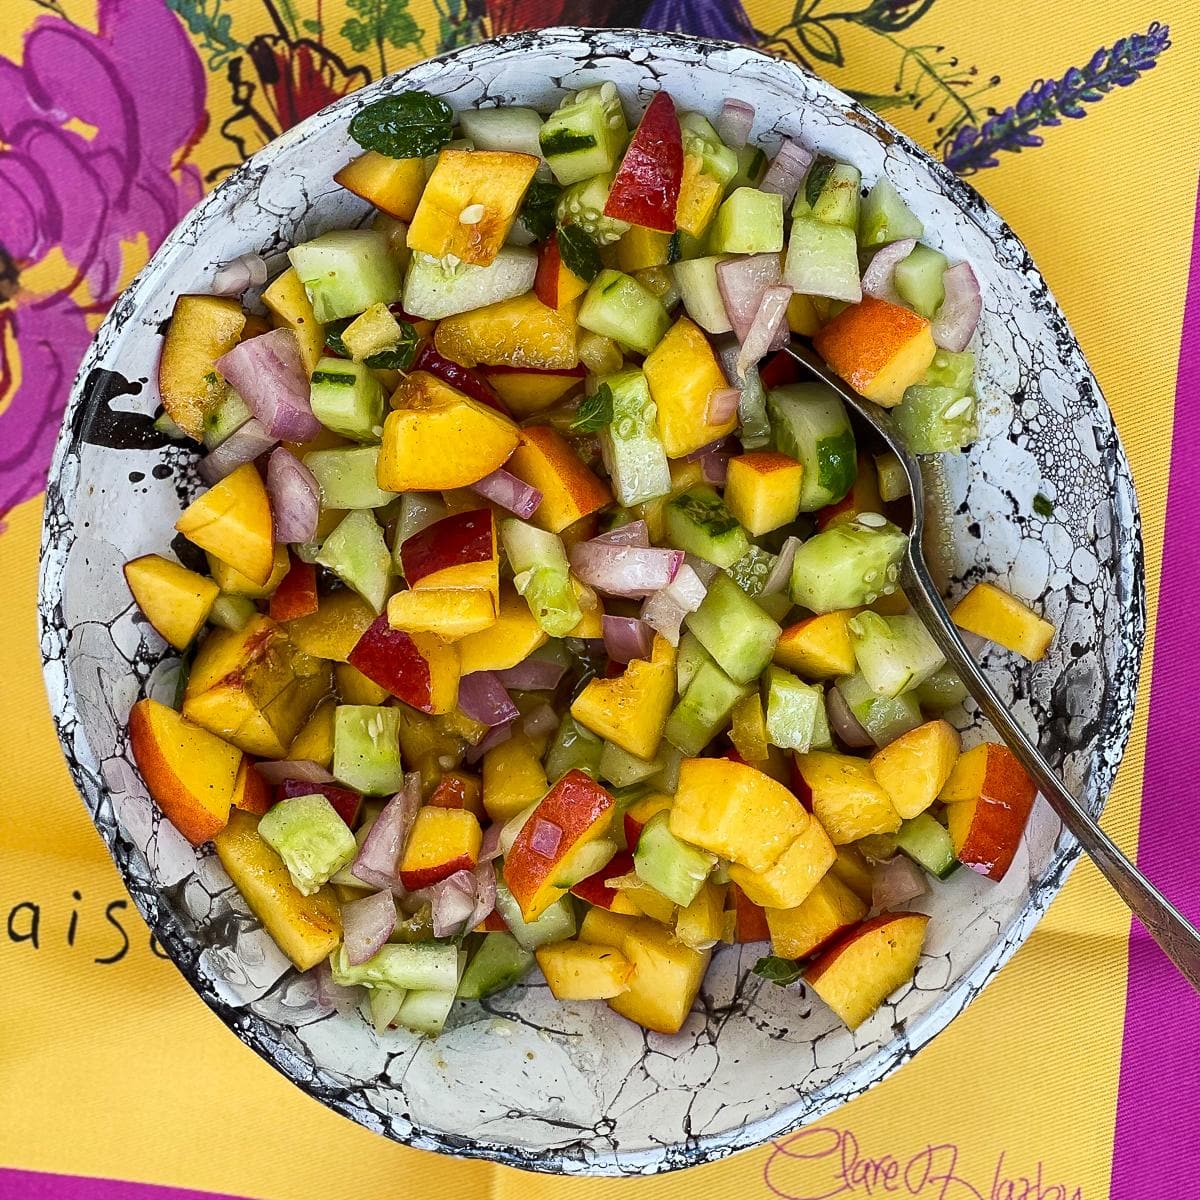 Summer salad with nectarines on a colourful tablecloth.